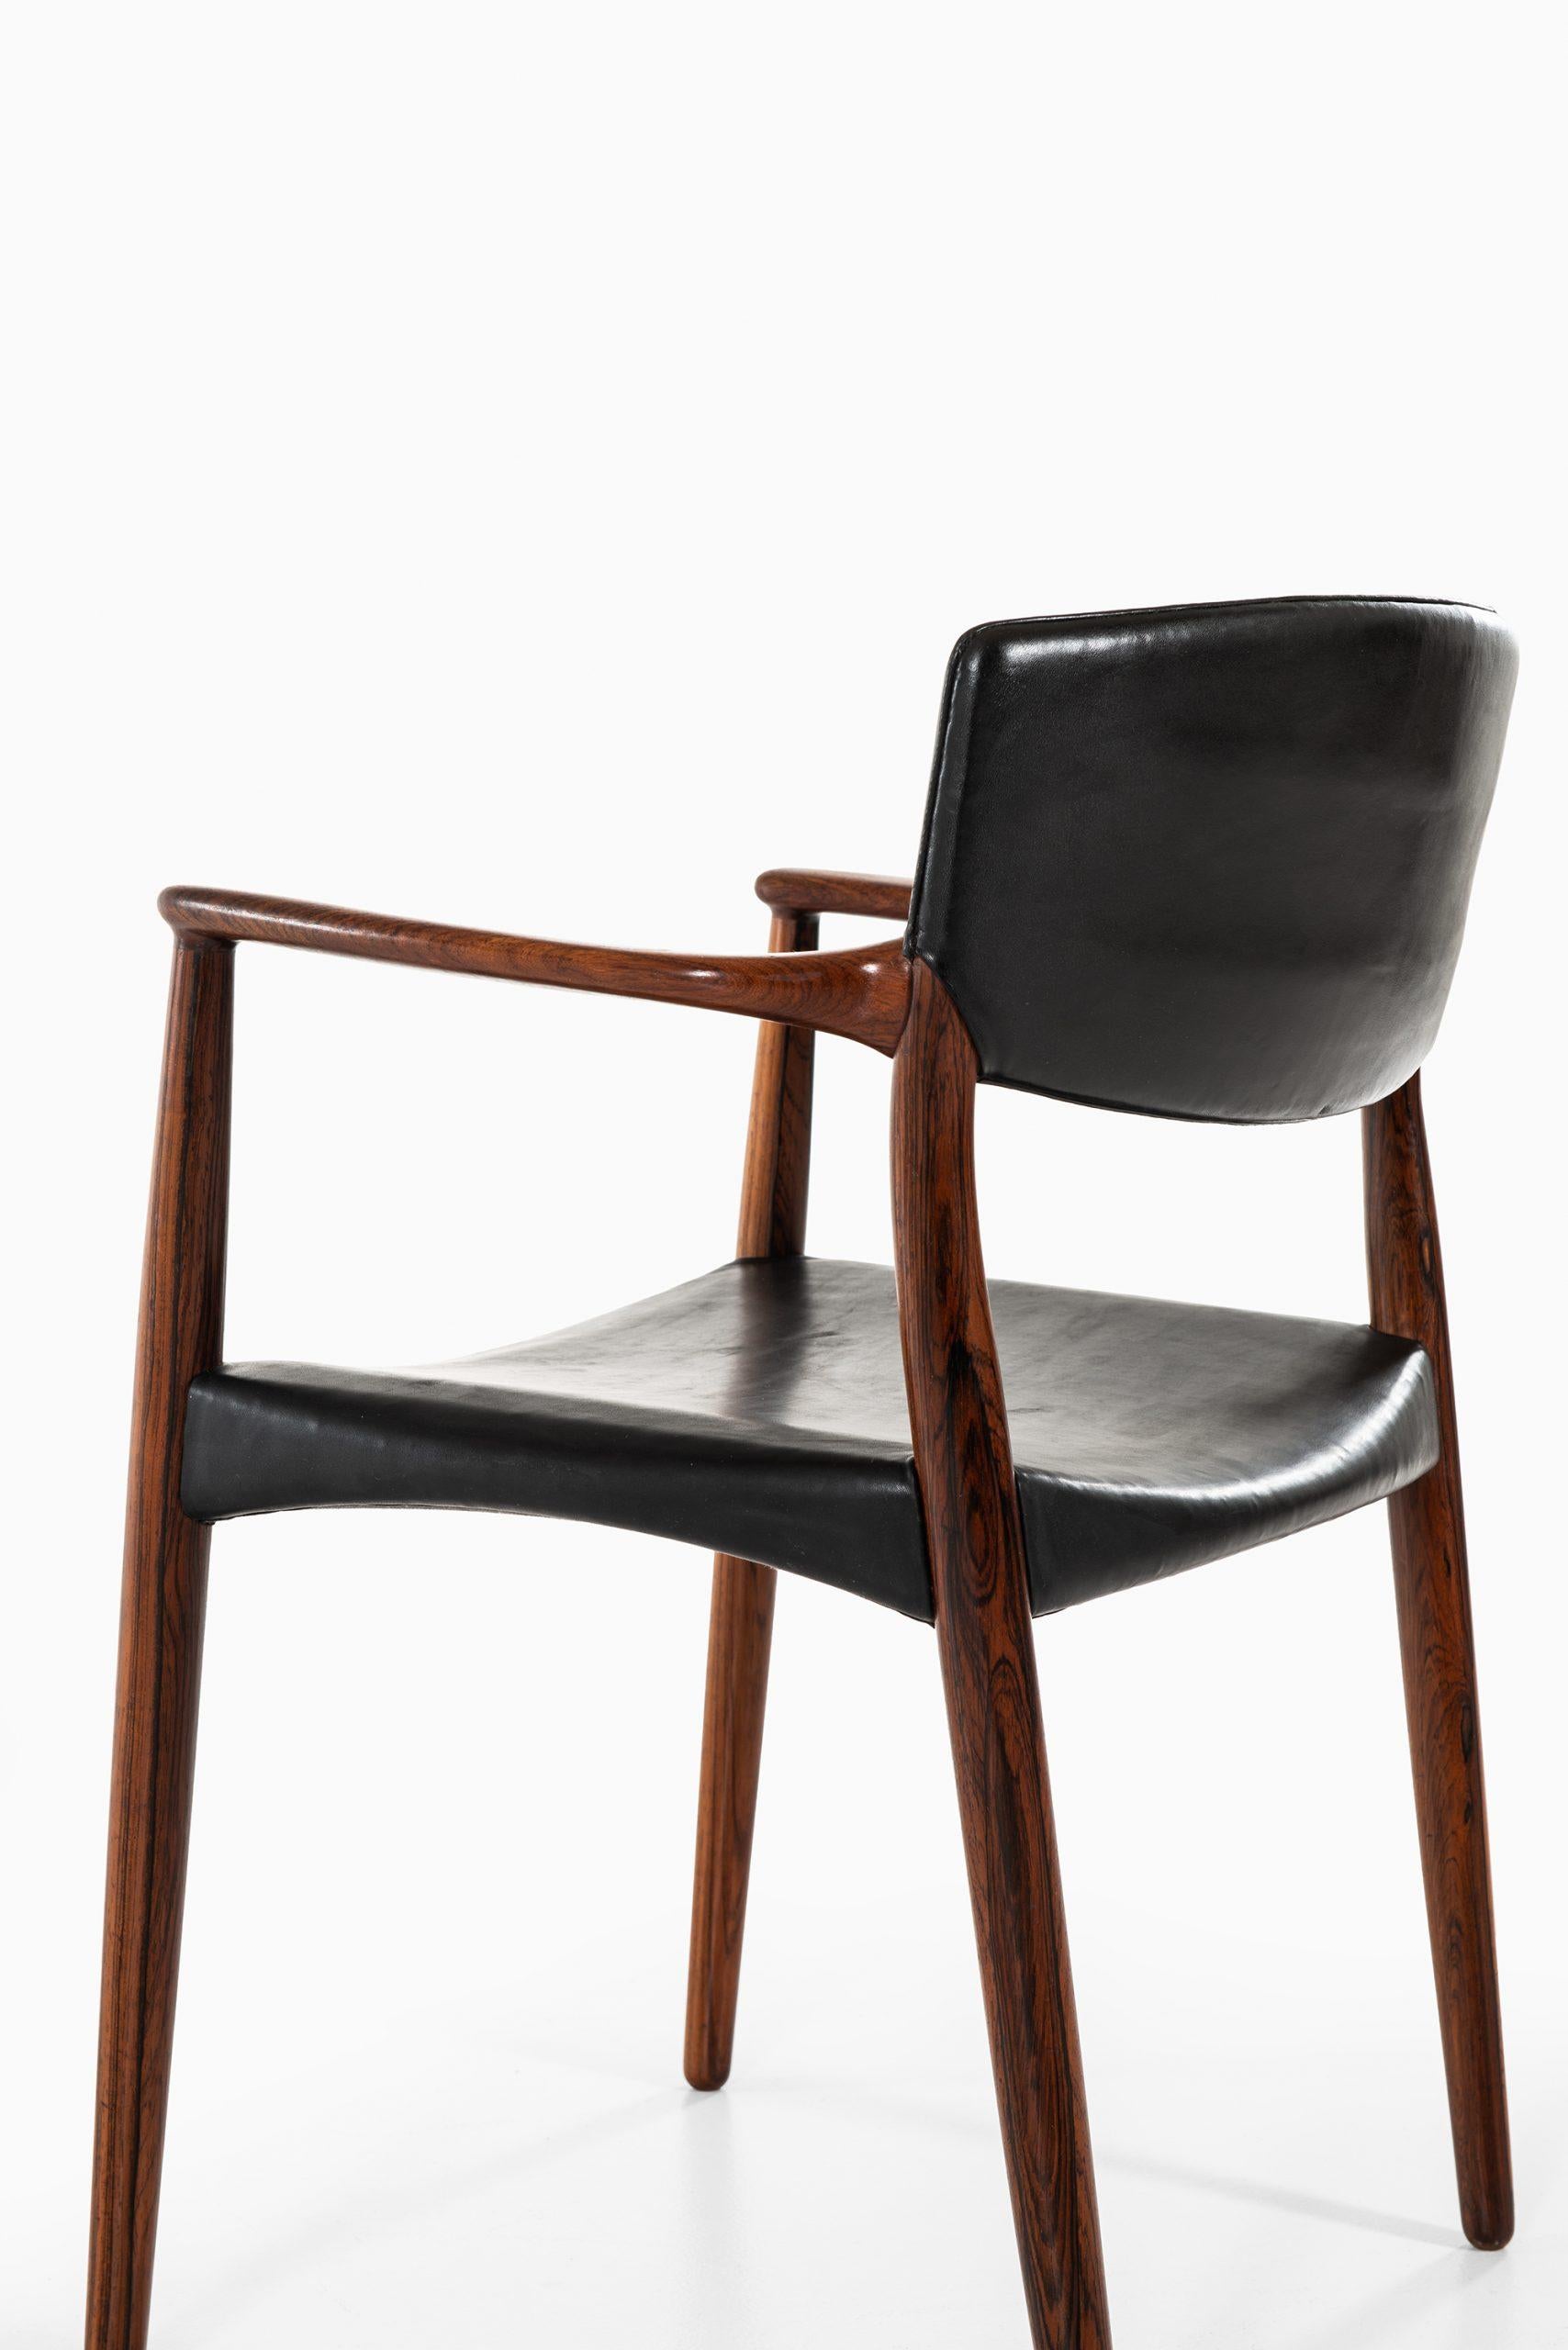 Mid-20th Century Aksel Bender Madsen & Ejner Larsen Armchairs by cabinetmaker Willy Beck For Sale